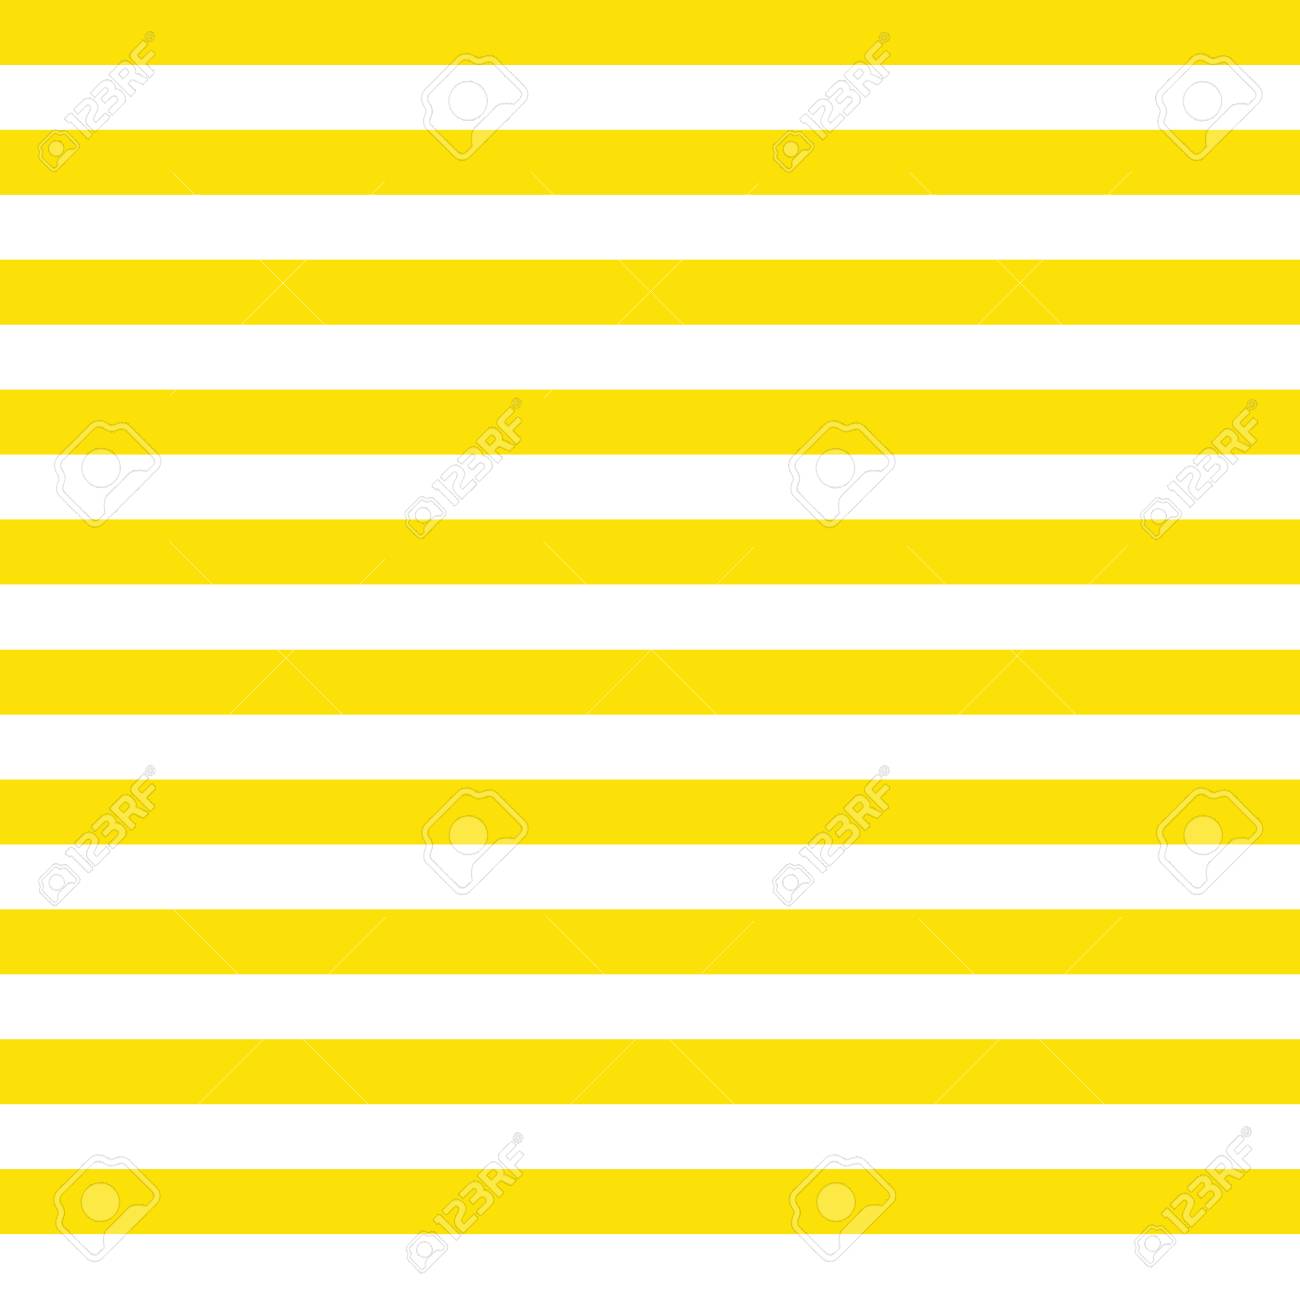 Yellow Stripes Vector Background With Horizontal Lines Summer